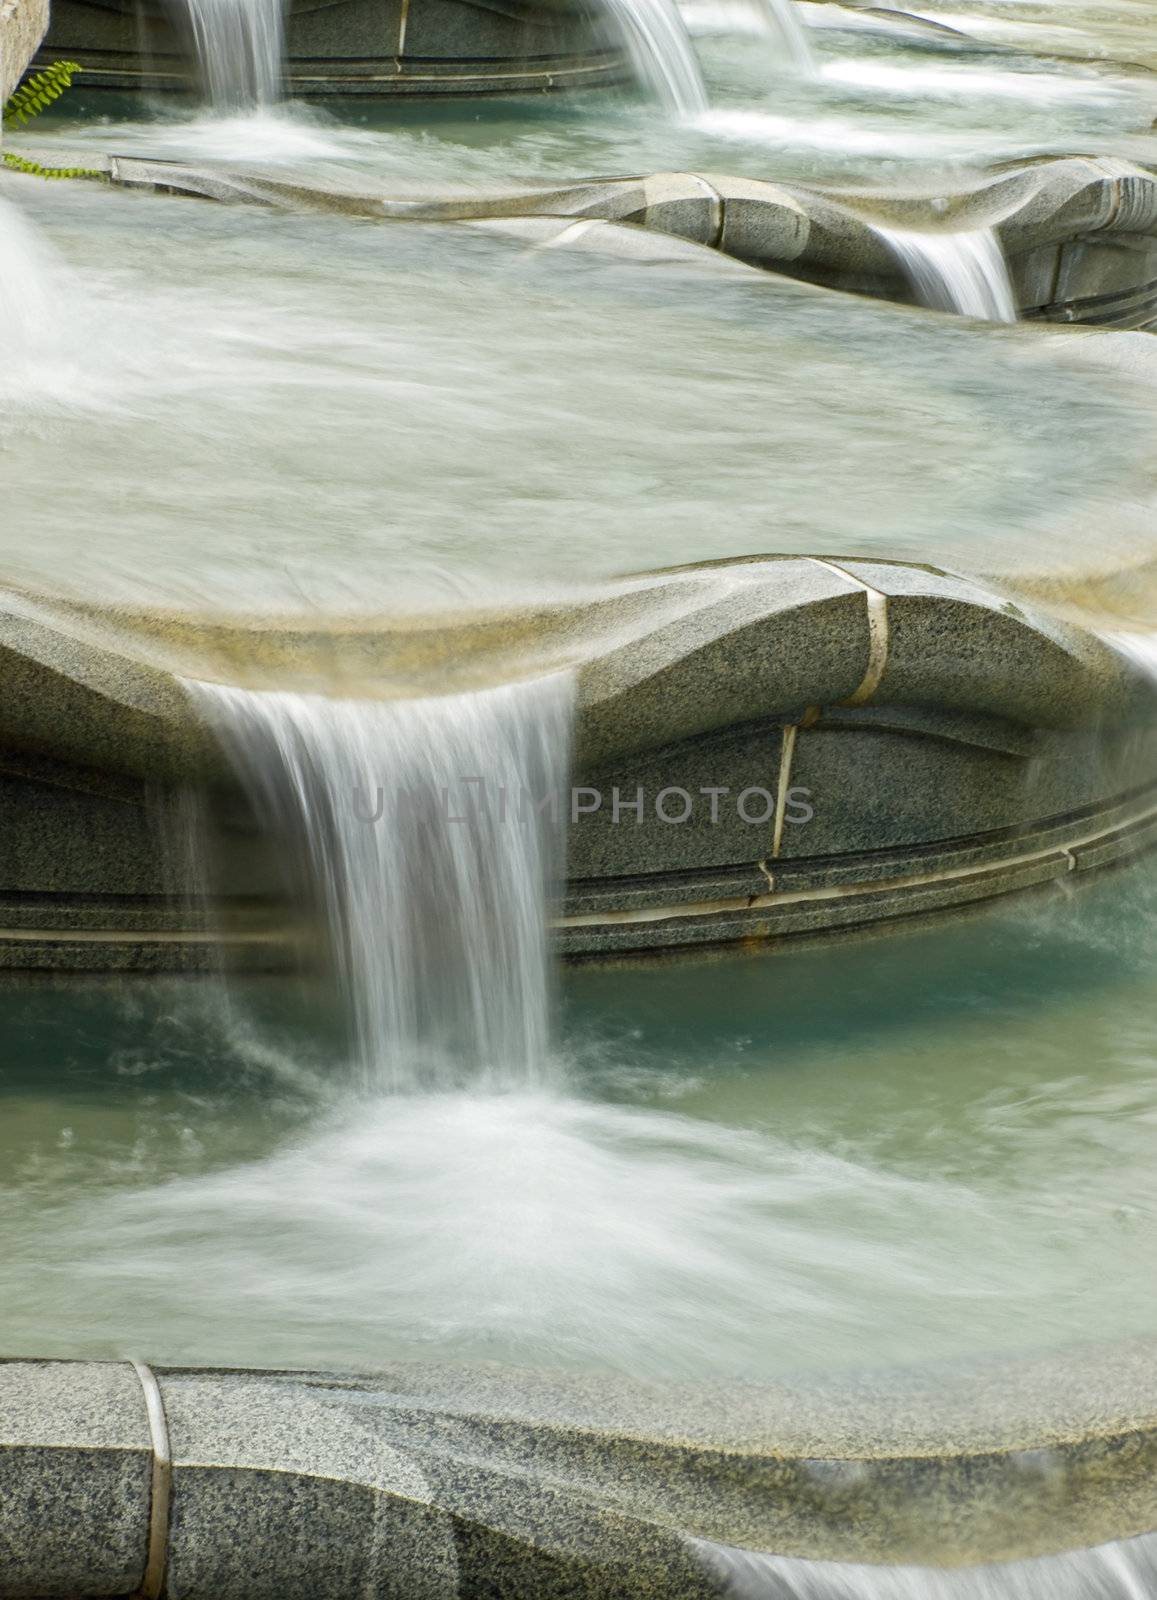 Water in a Fountain Flowing with a Slow Shutter